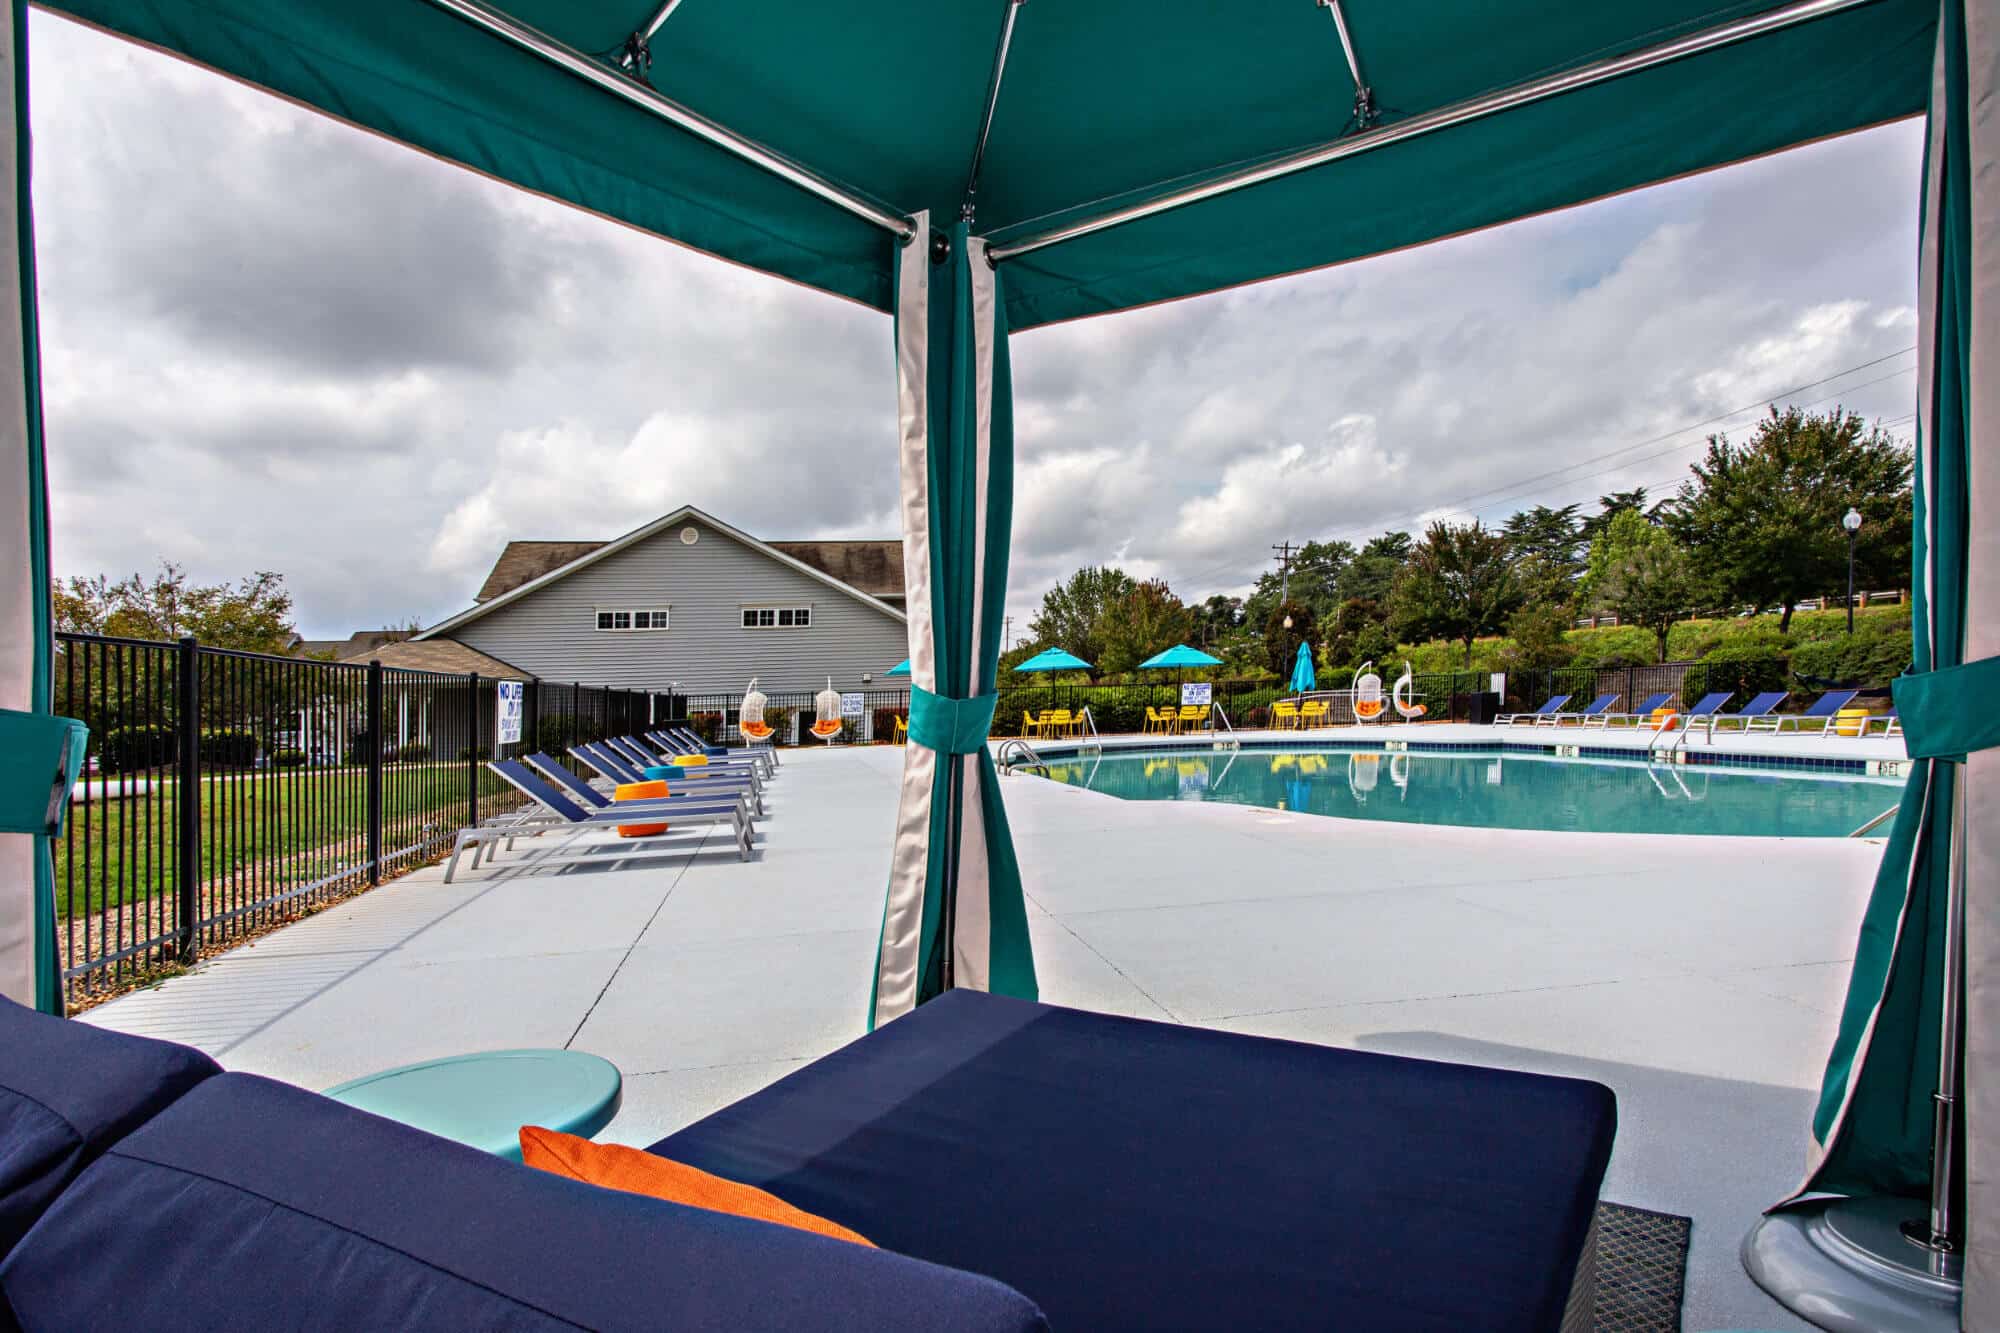 university village at clemson off campus apartments and townhomes near clemson university resort style pool cabana